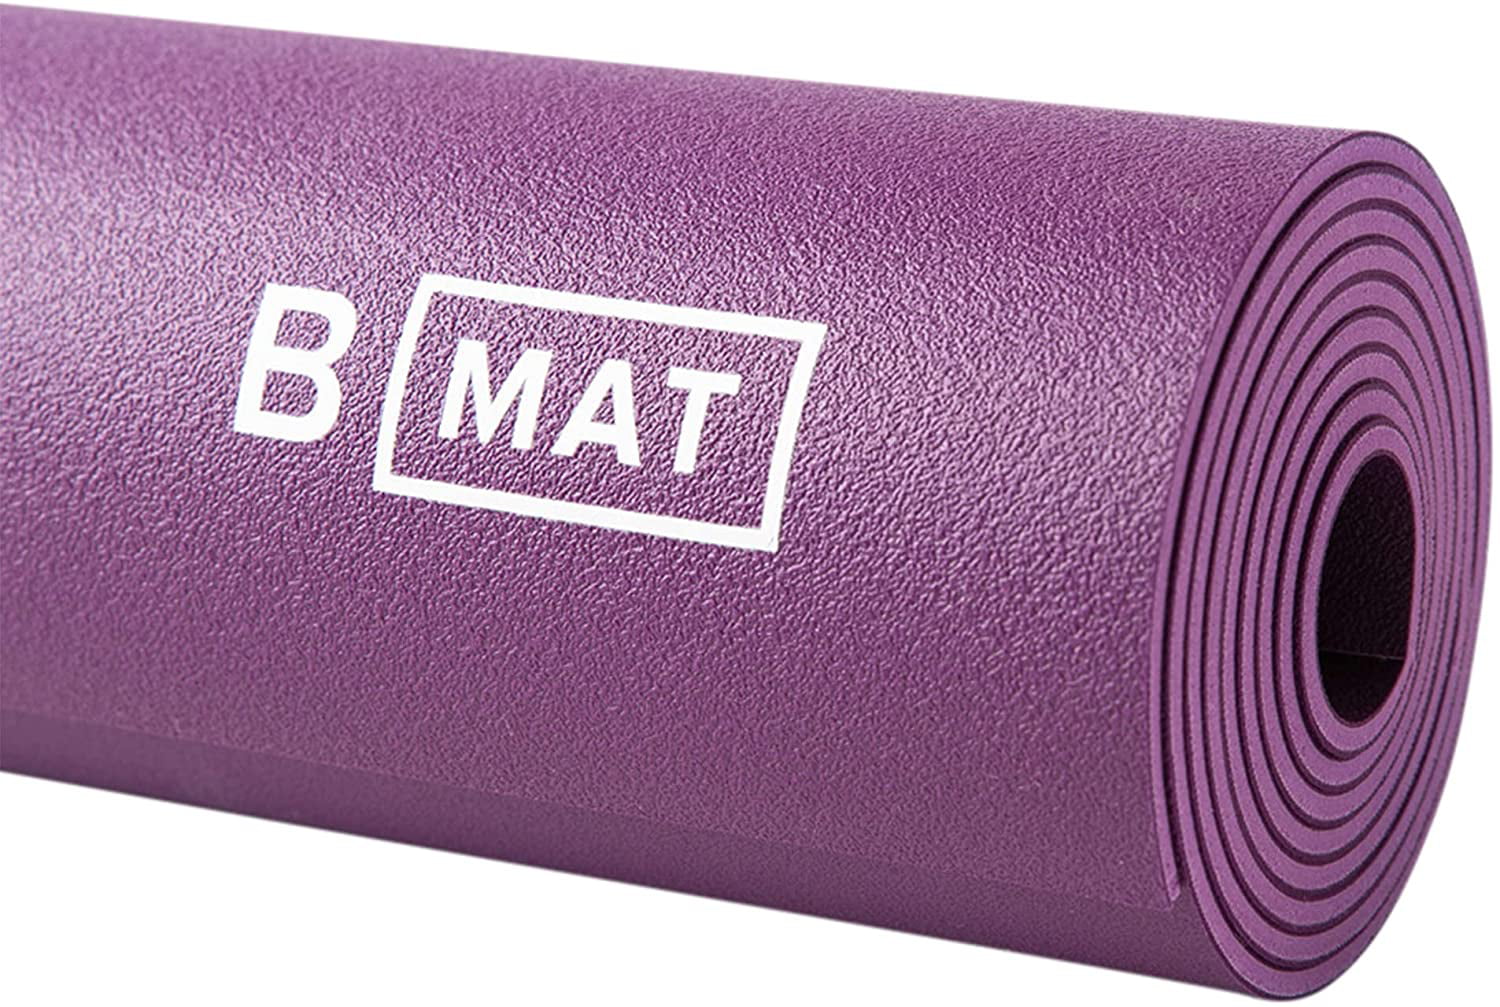 Pilates 100% Rubber High Performance Non Slip B YOGA Everyday 4mm Yoga Mat Super Grippy for Yoga 71 or 85 Workout and Floor Exercises 